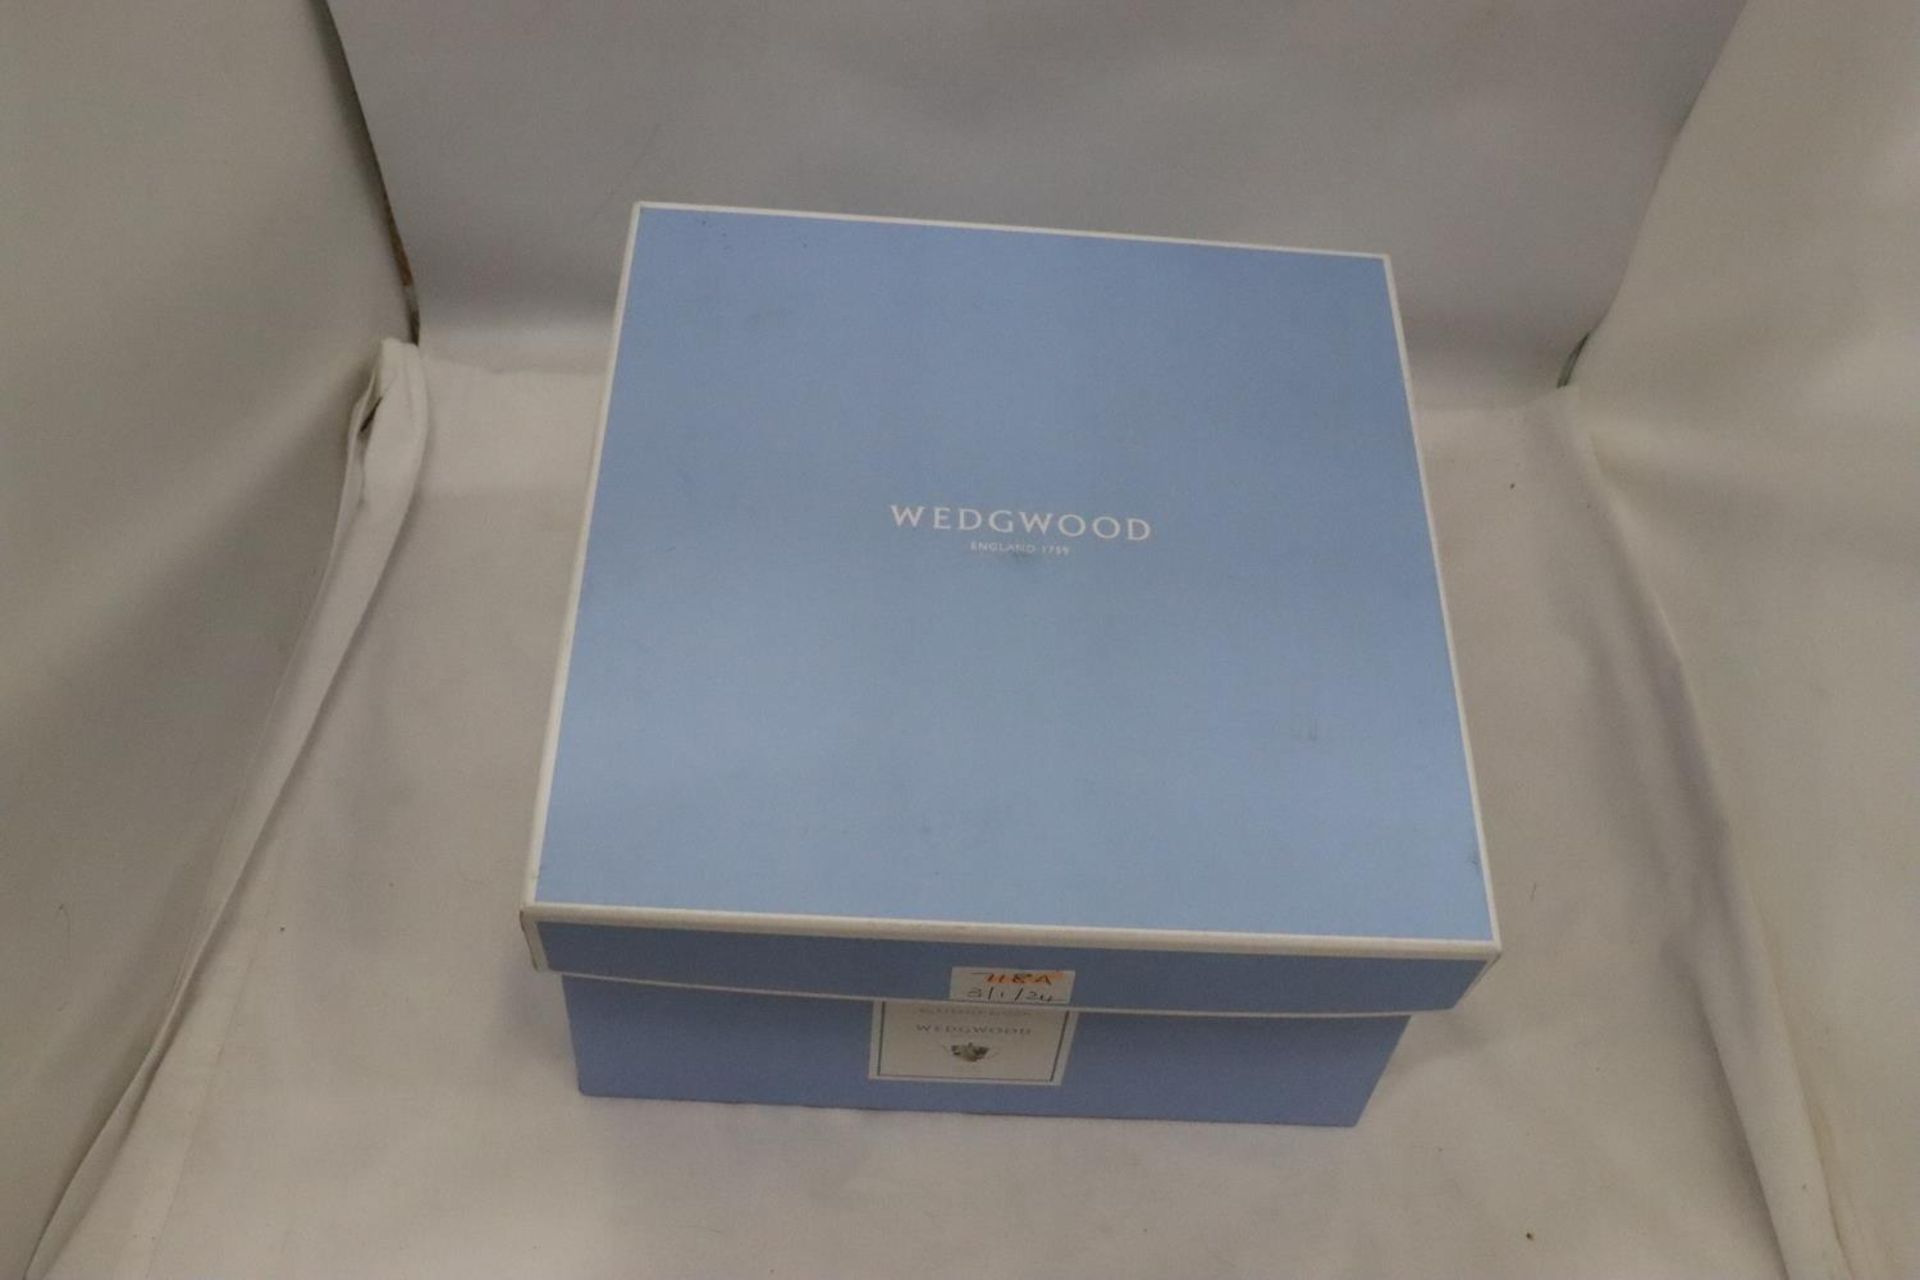 A BOXED WEDGWOOD TEAPOT BUTTERFLY BLOOM - Image 4 of 4